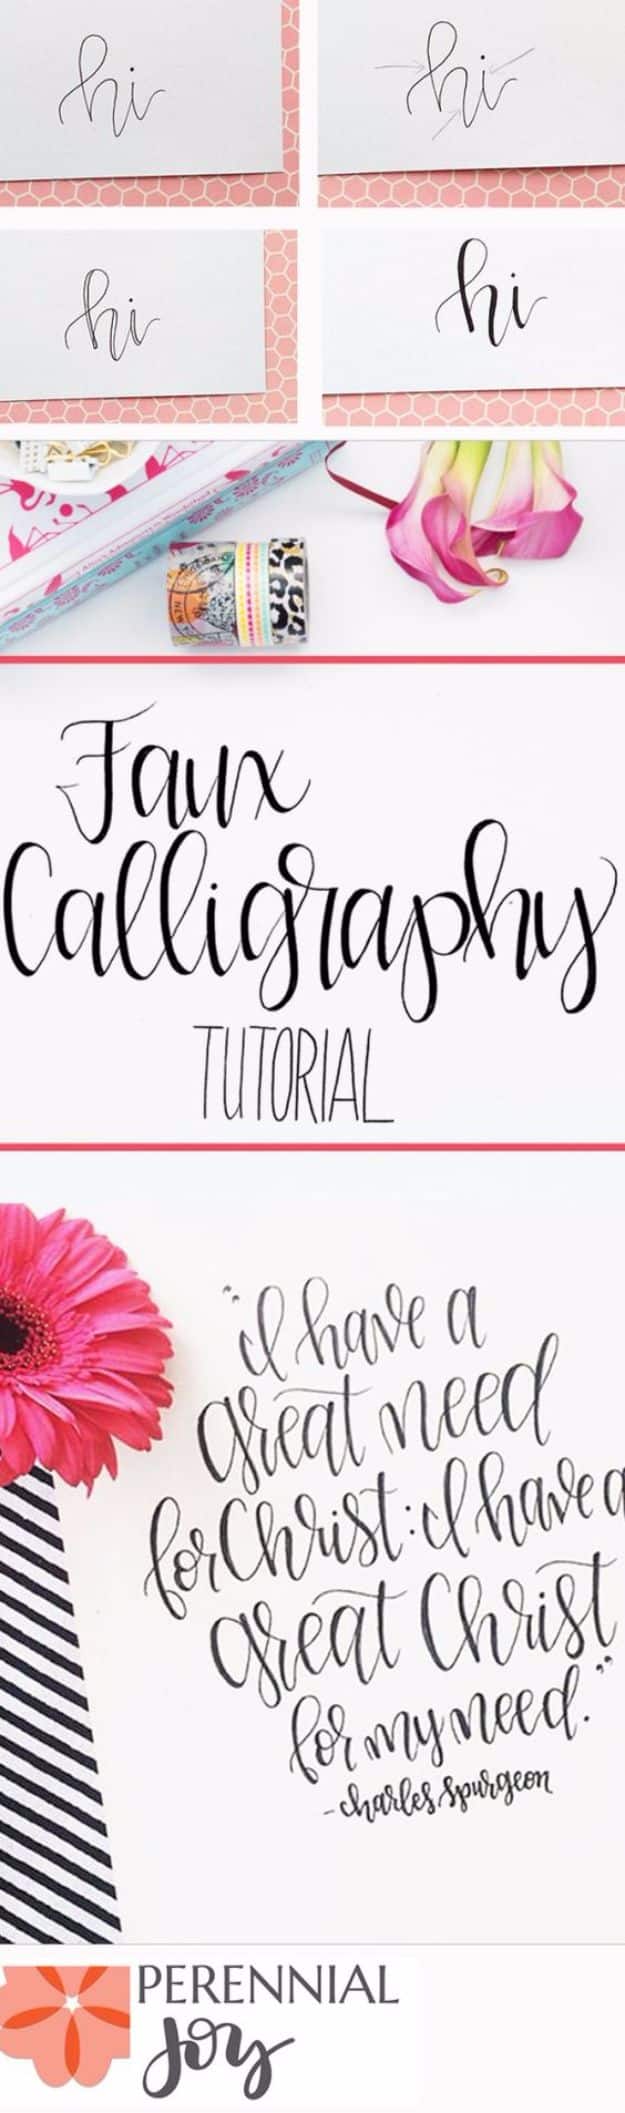 Brush Lettering Tutorials - Faux Calligraphy - Simple and Fun Calligraphy Tutorial Videos - How To Paint the Alphabet in Calligraphy Handwriting with Pens, Watercolors, Adobe Illustrator and Sharpie 